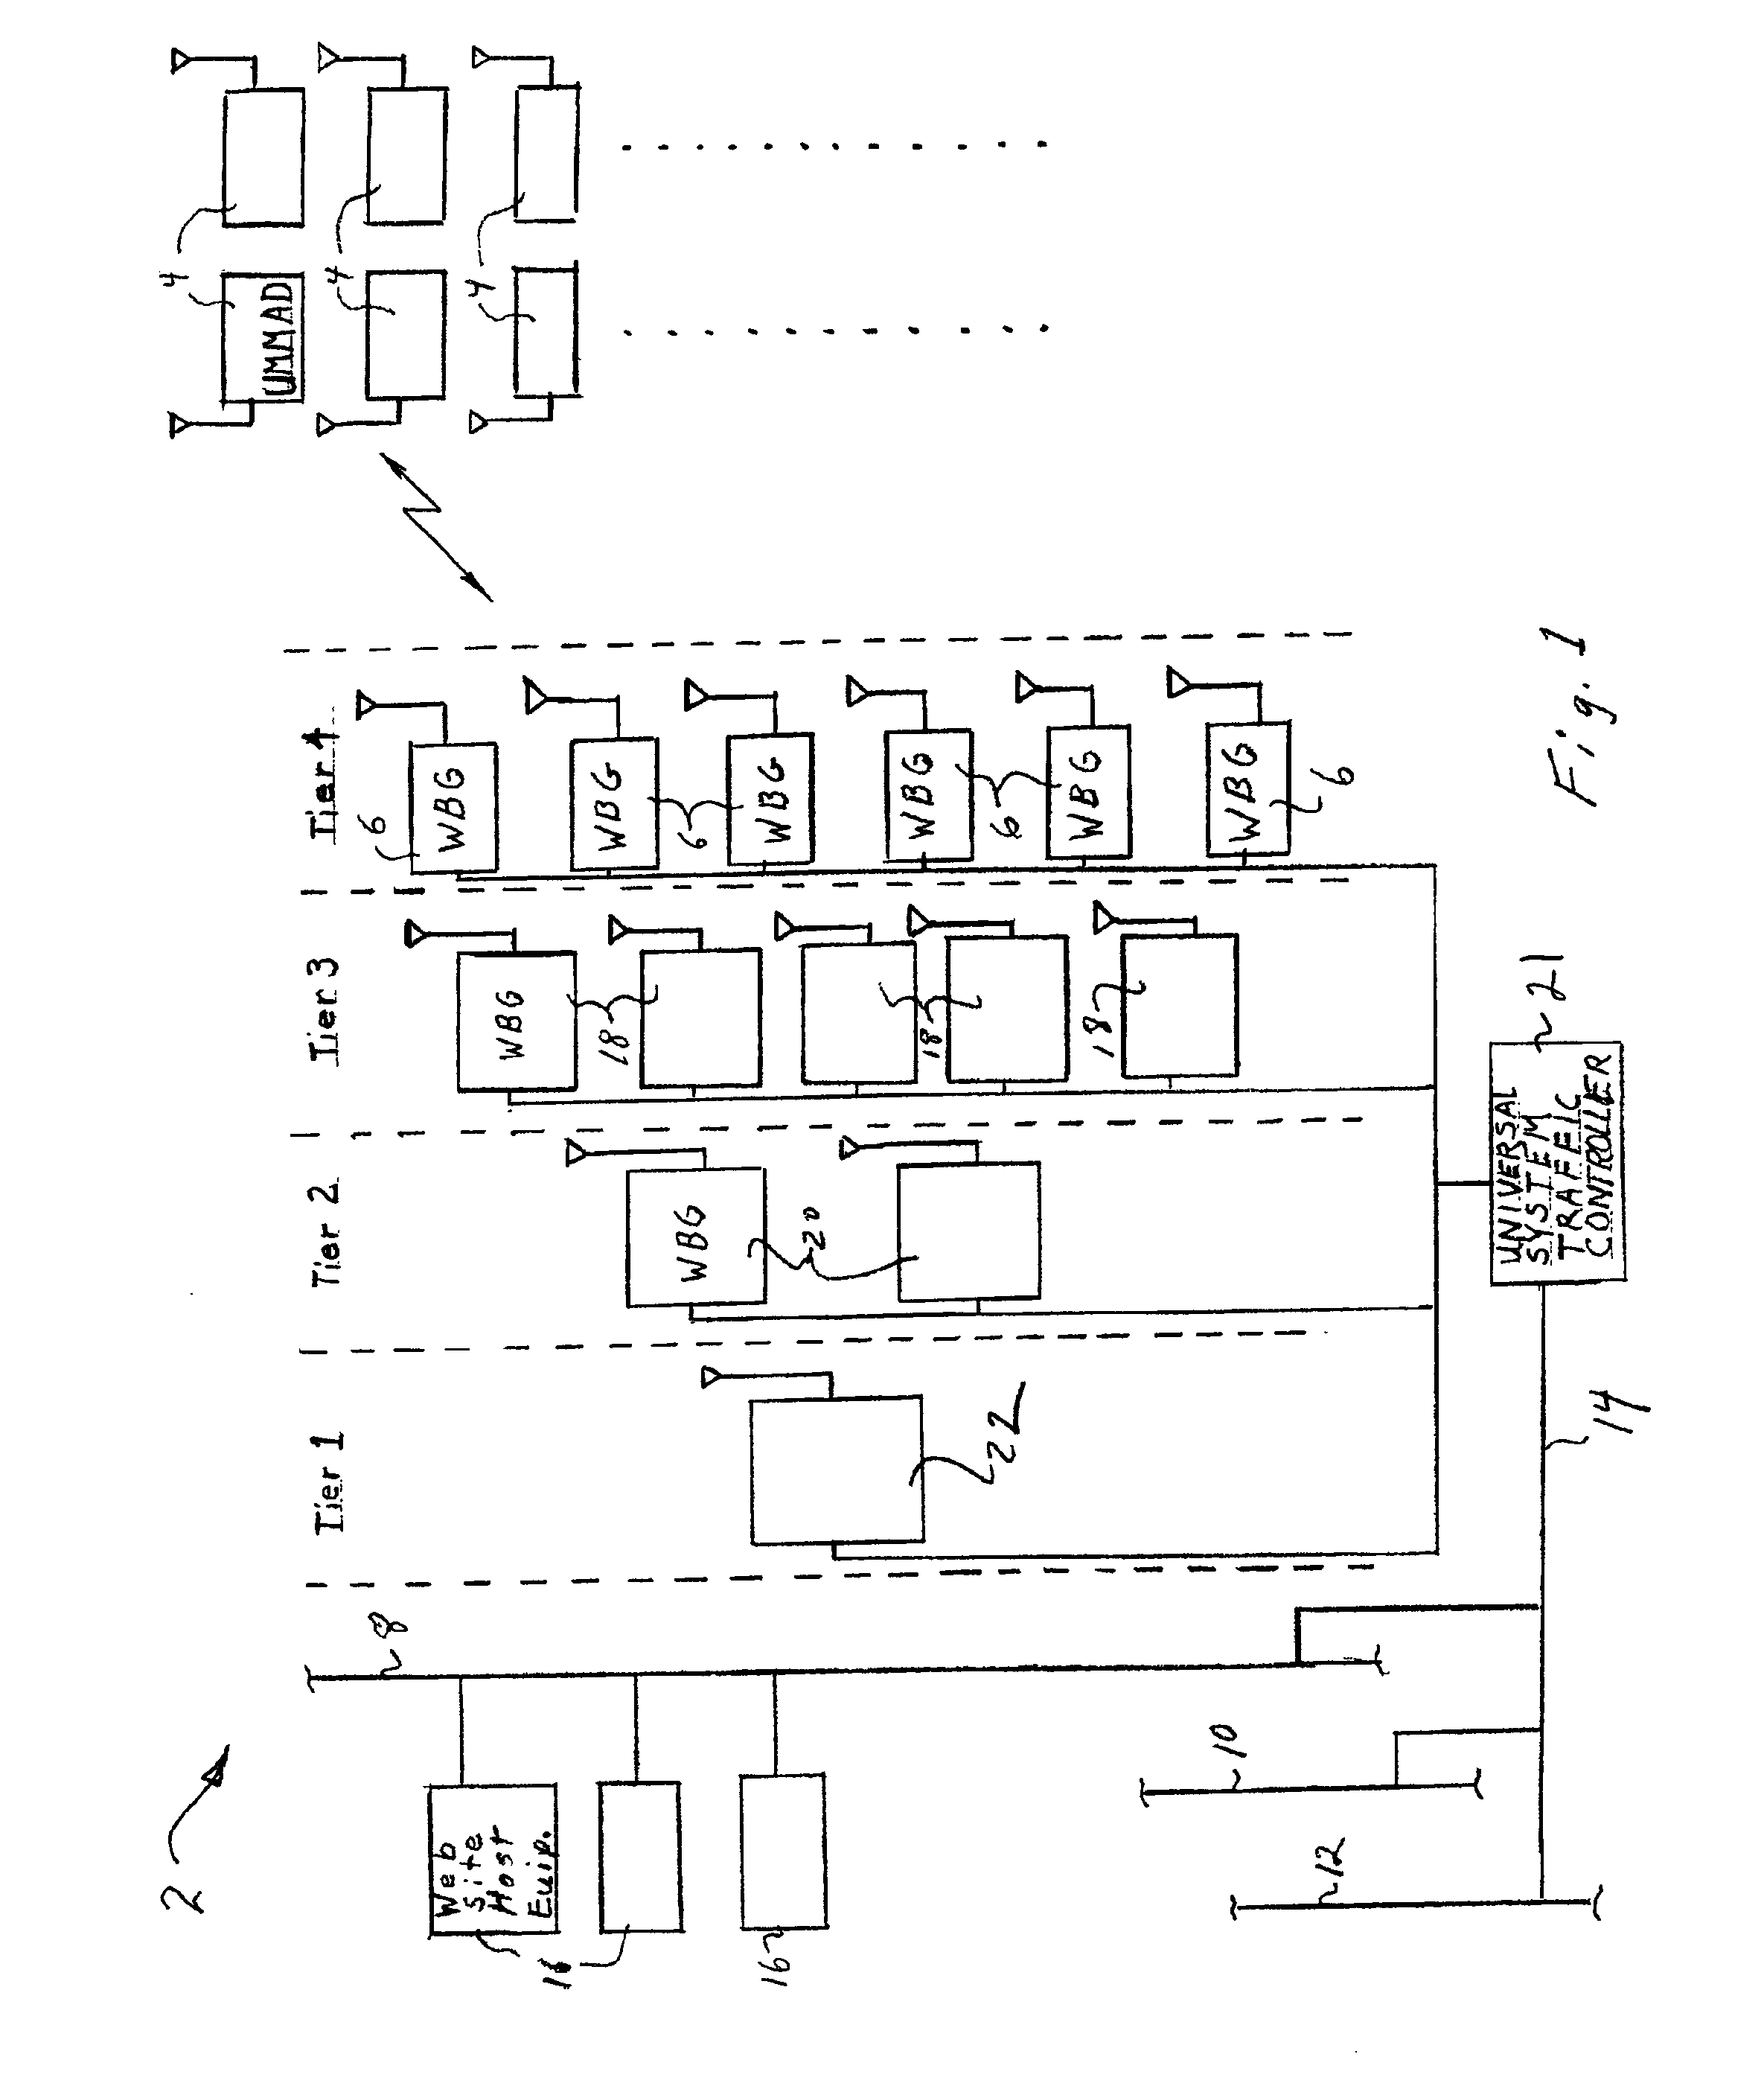 Tiered wireless, multi-modal access system and method